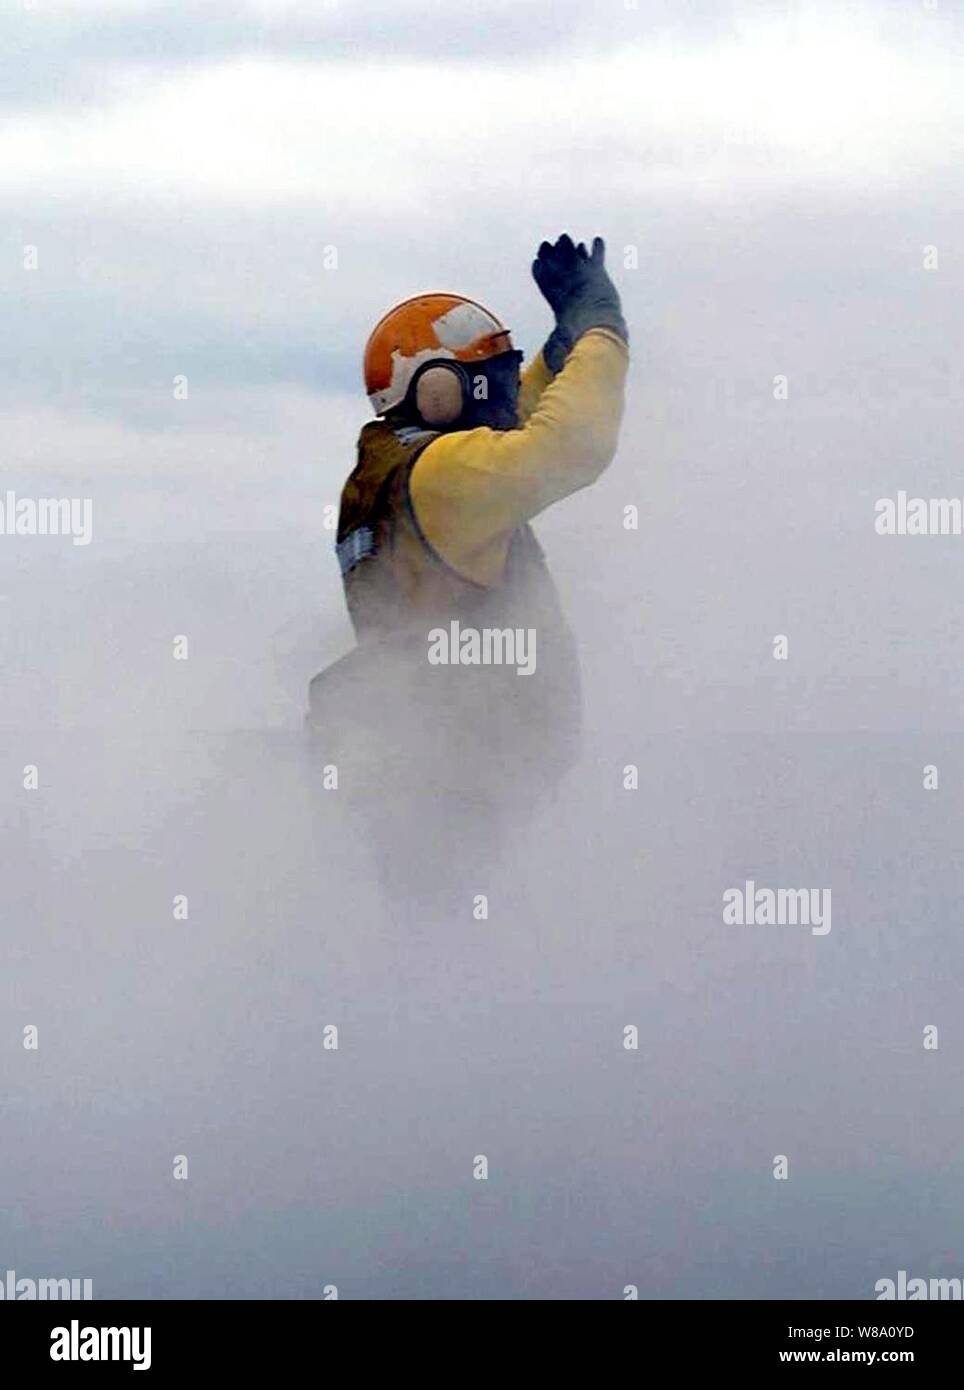 A flight deck handling officer on board the USS Enterprise (CVN 65) is engulfed in steam while directing aircraft onto the number one steam driven catapult during flight operations on April 27, 1996, while the ship is underway for Combined Joint Task Force Exercise '96.  More than 53,000 military service members from the United States and the United Kingdom are participating in Combined Joint Task Force Exercise 96 on military installations in the Southeastern United States and in waters along the Eastern seaboard. Stock Photo